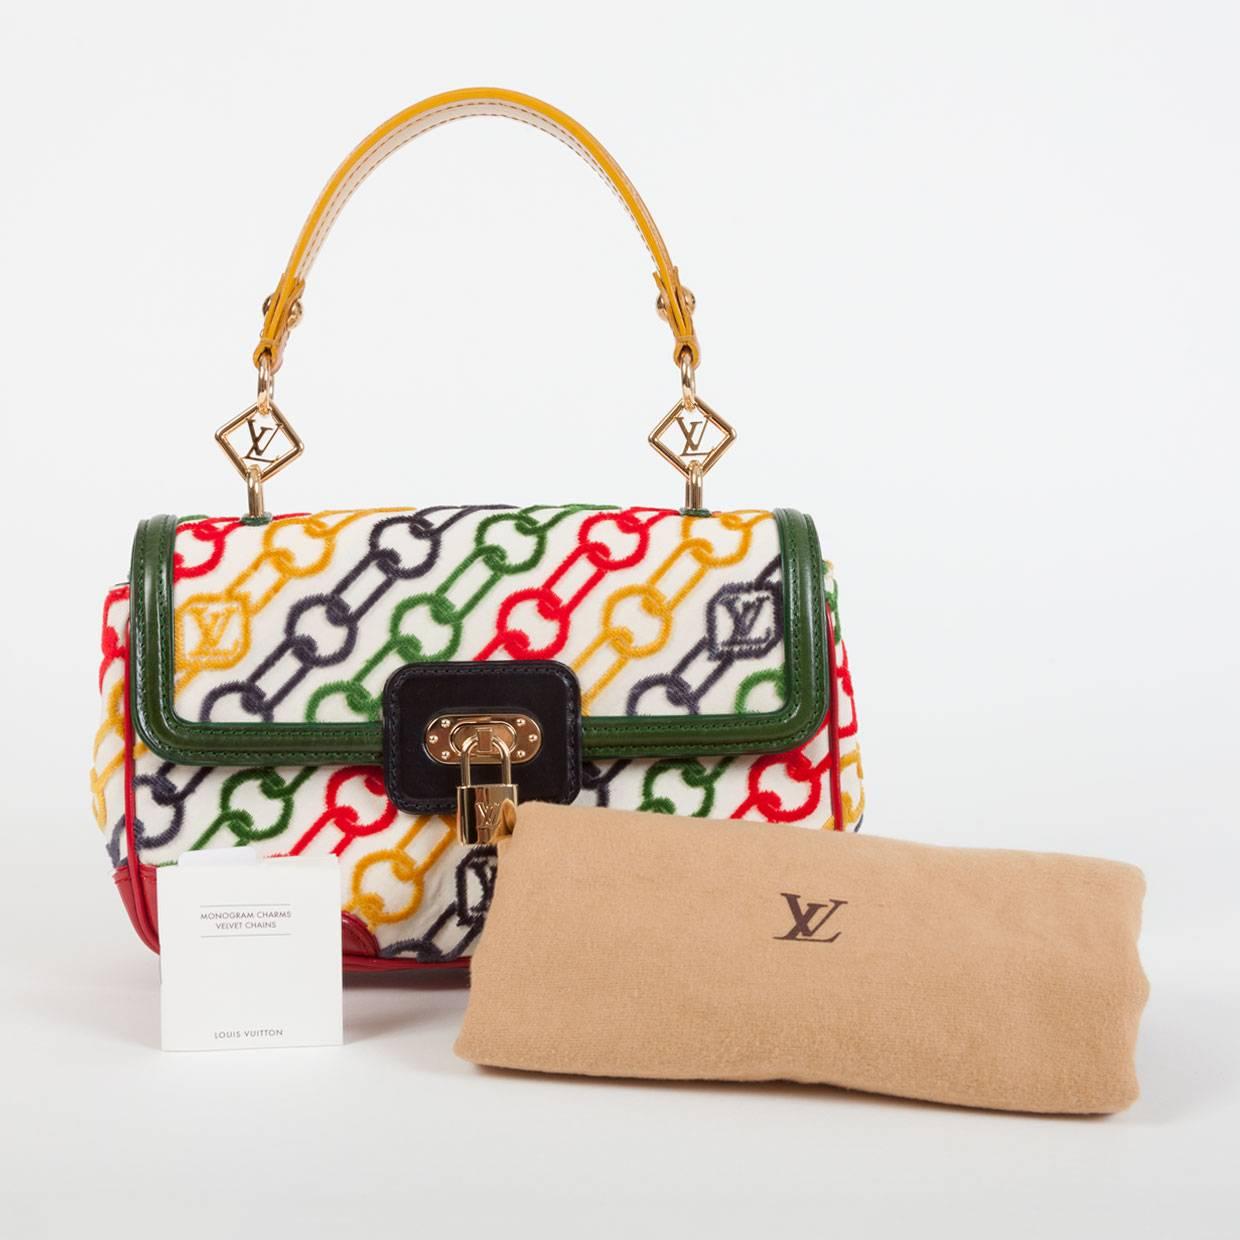 Originally founded in 1854 Paris, France, Louis Vuitton purses & luggage are iconic & highly collectible. Their limited edition pieces are even more so. Their one-off designs strive for perfection by bringing together technical innovation &